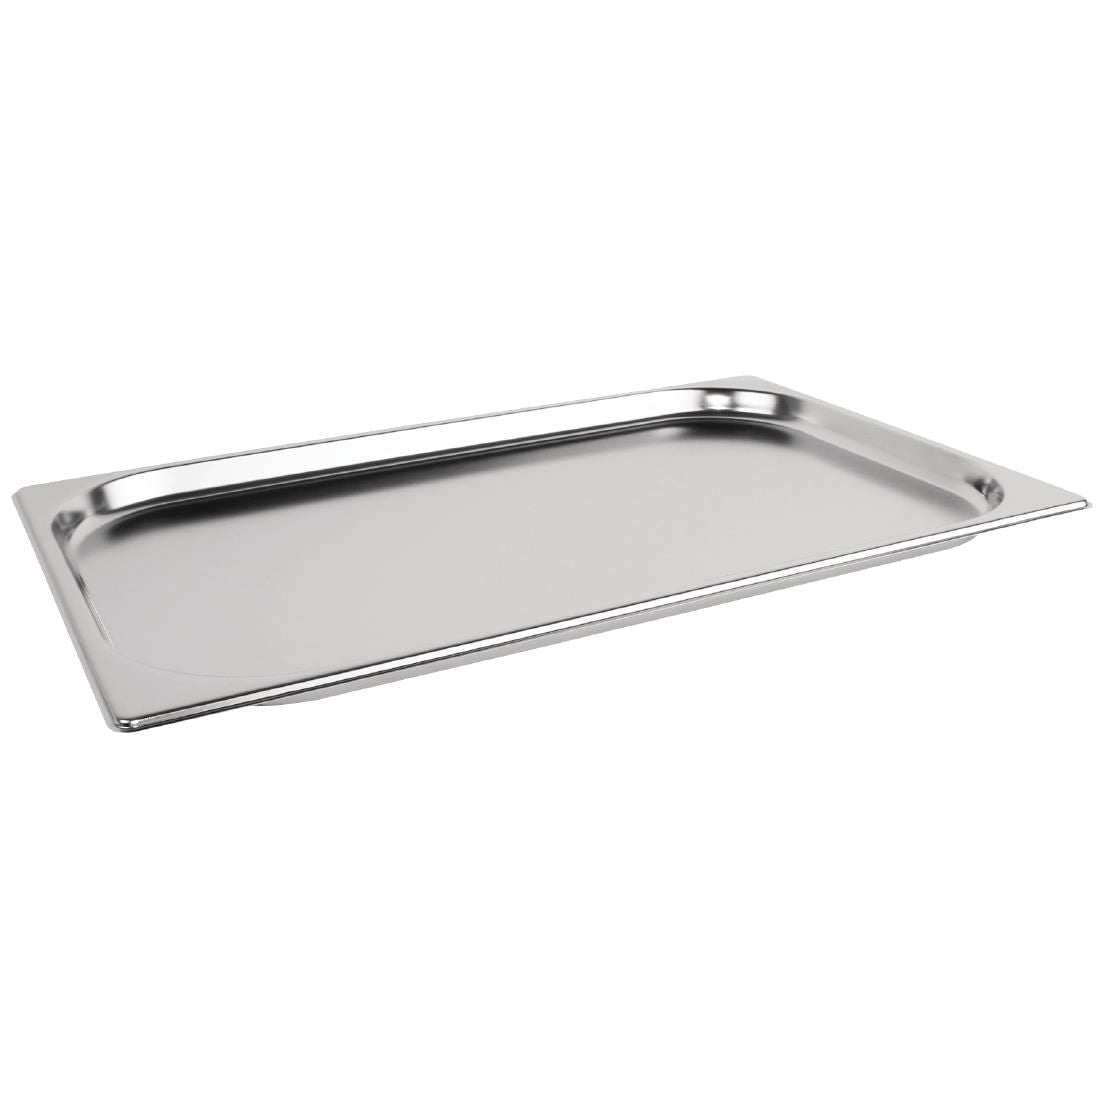 K998 Vogue Stainless Steel 1/1 Gastronorm Pan 20mm